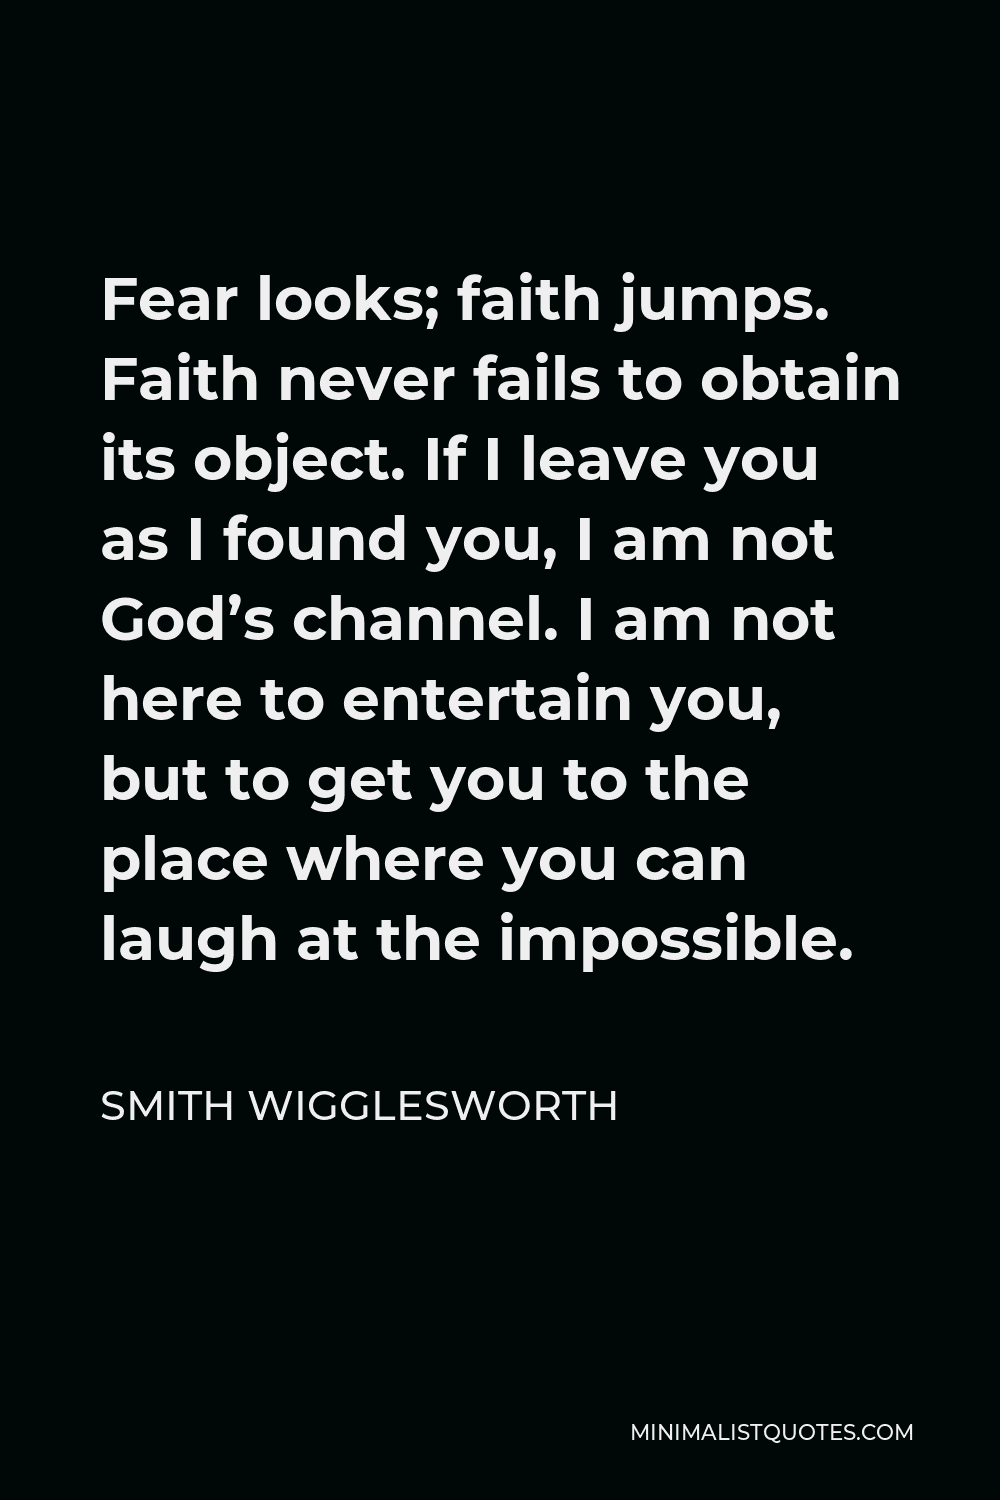 Smith Wigglesworth Quote - Fear looks; faith jumps. Faith never fails to obtain its object. If I leave you as I found you, I am not God’s channel. I am not here to entertain you, but to get you to the place where you can laugh at the impossible.